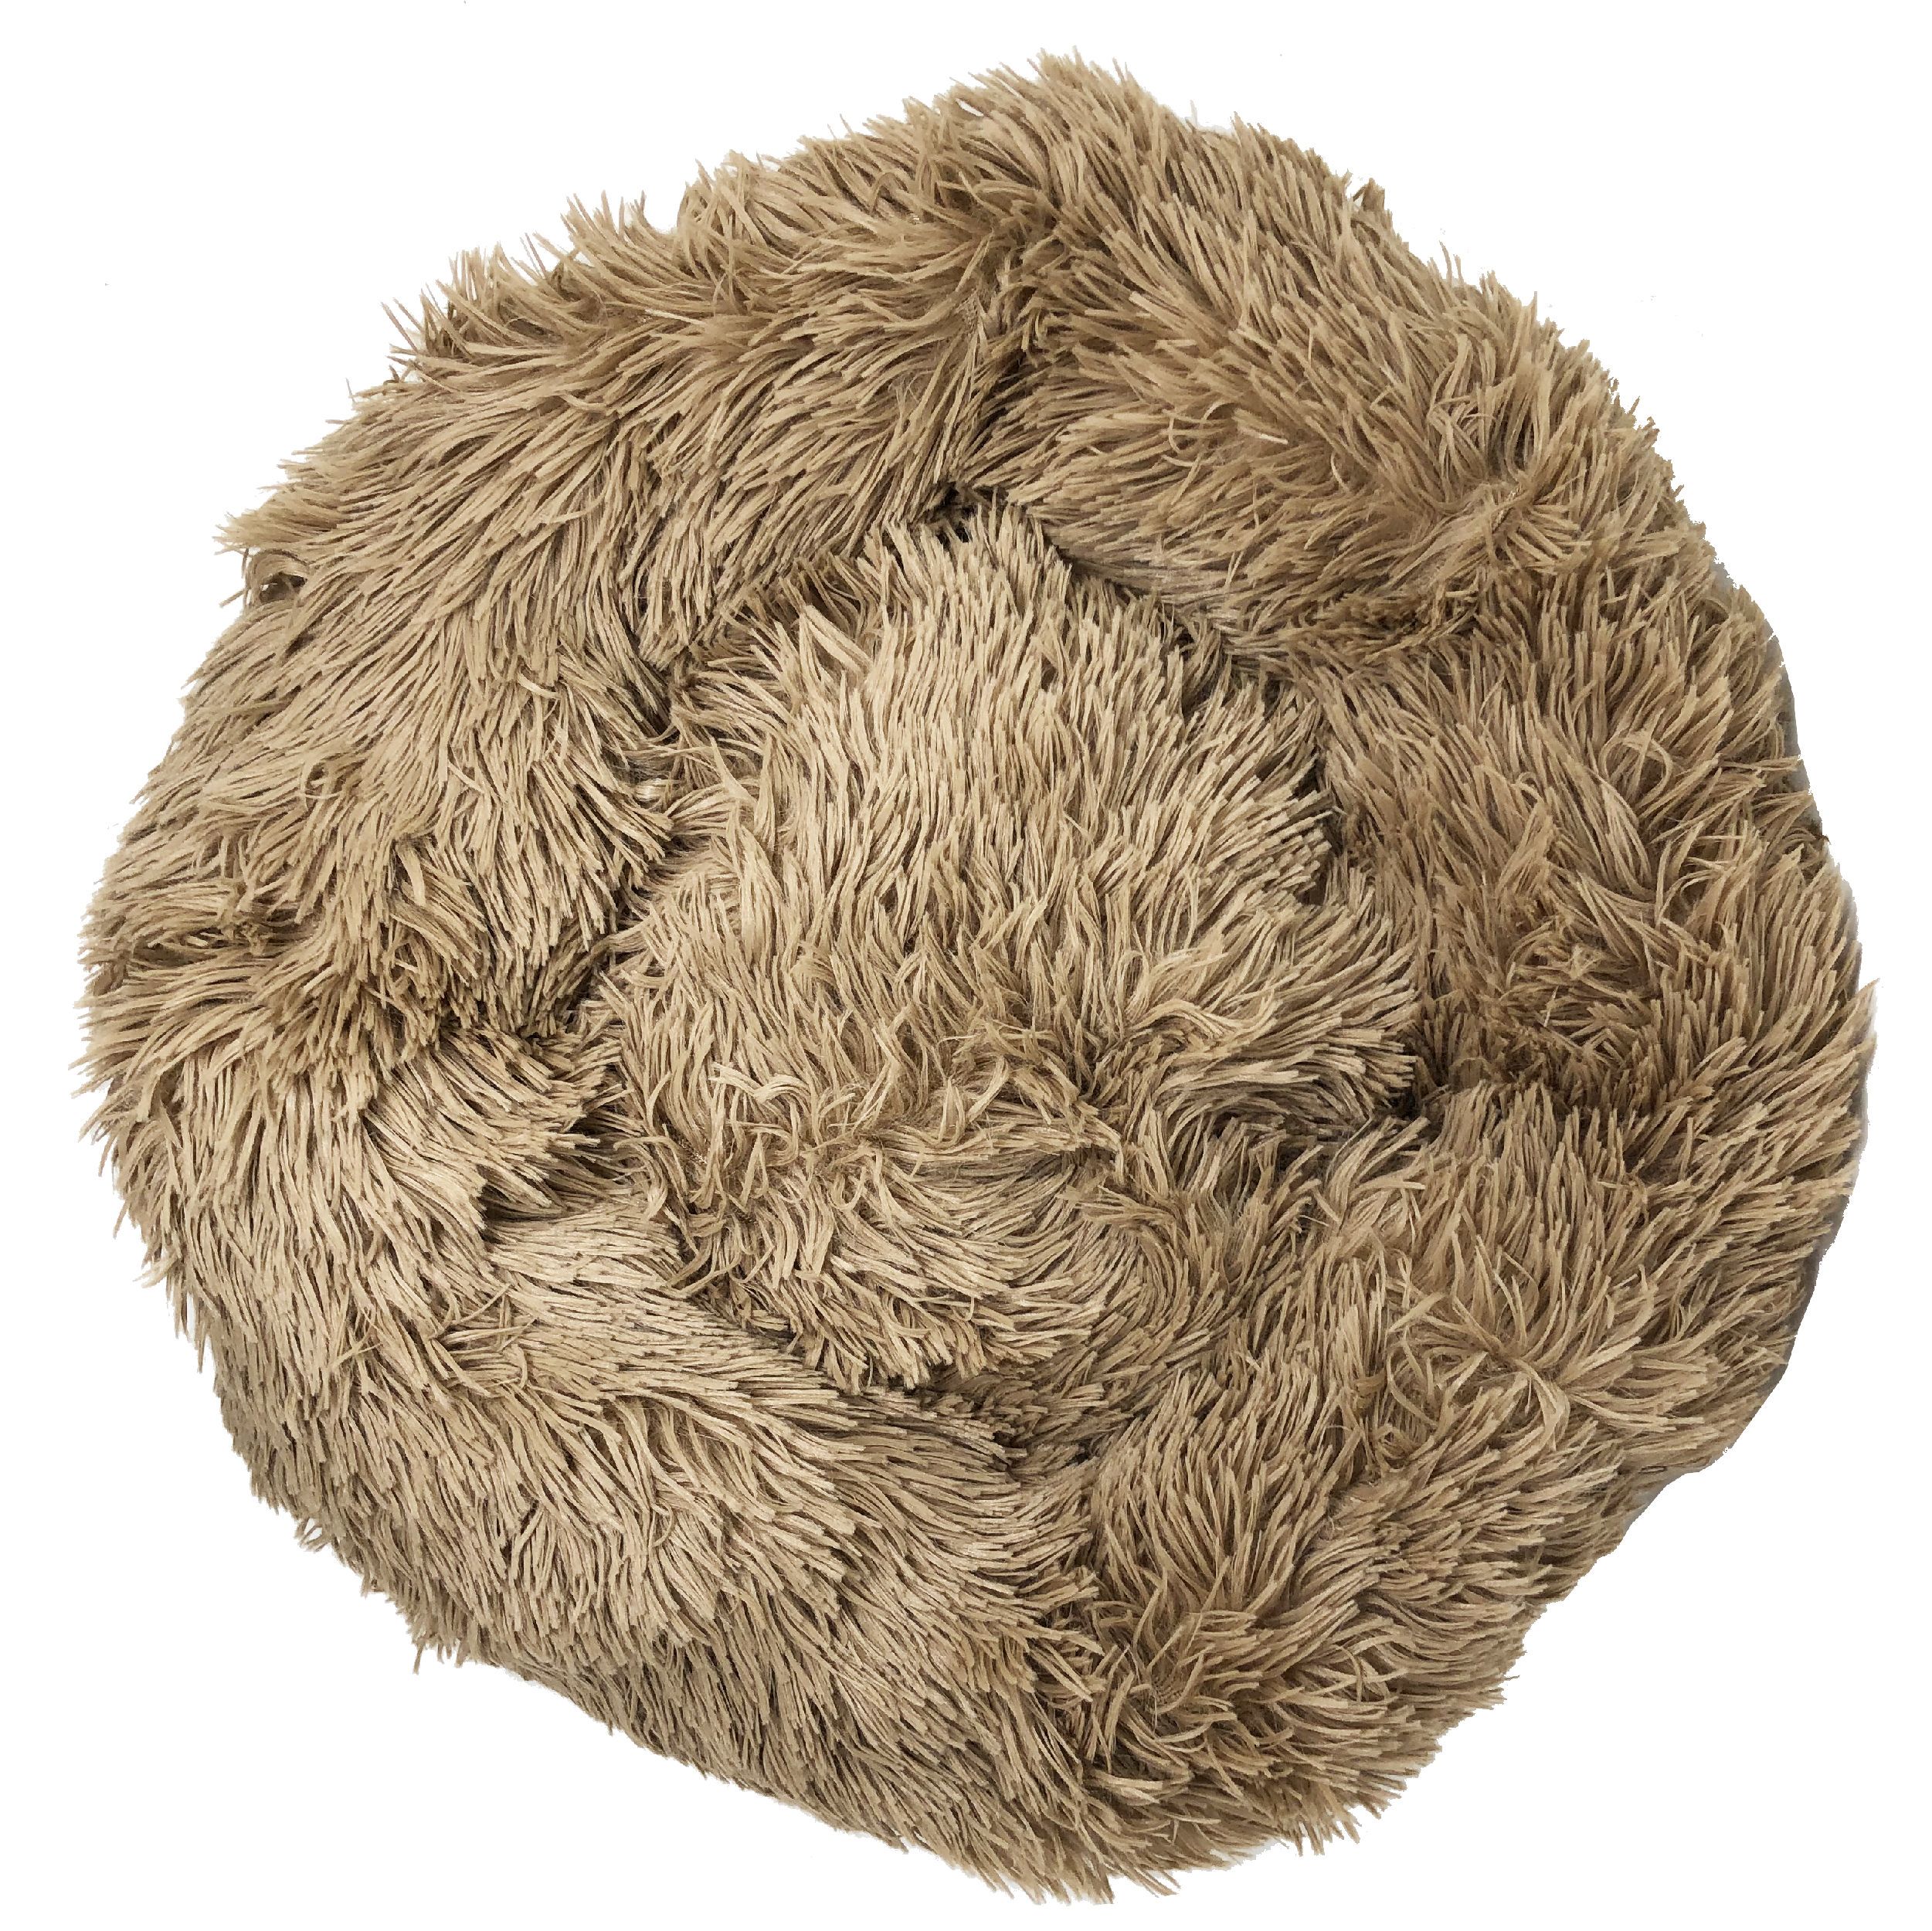 Pet Life ® 'Nestler' High-Grade Plush and Soft Rounded Pet Bed  